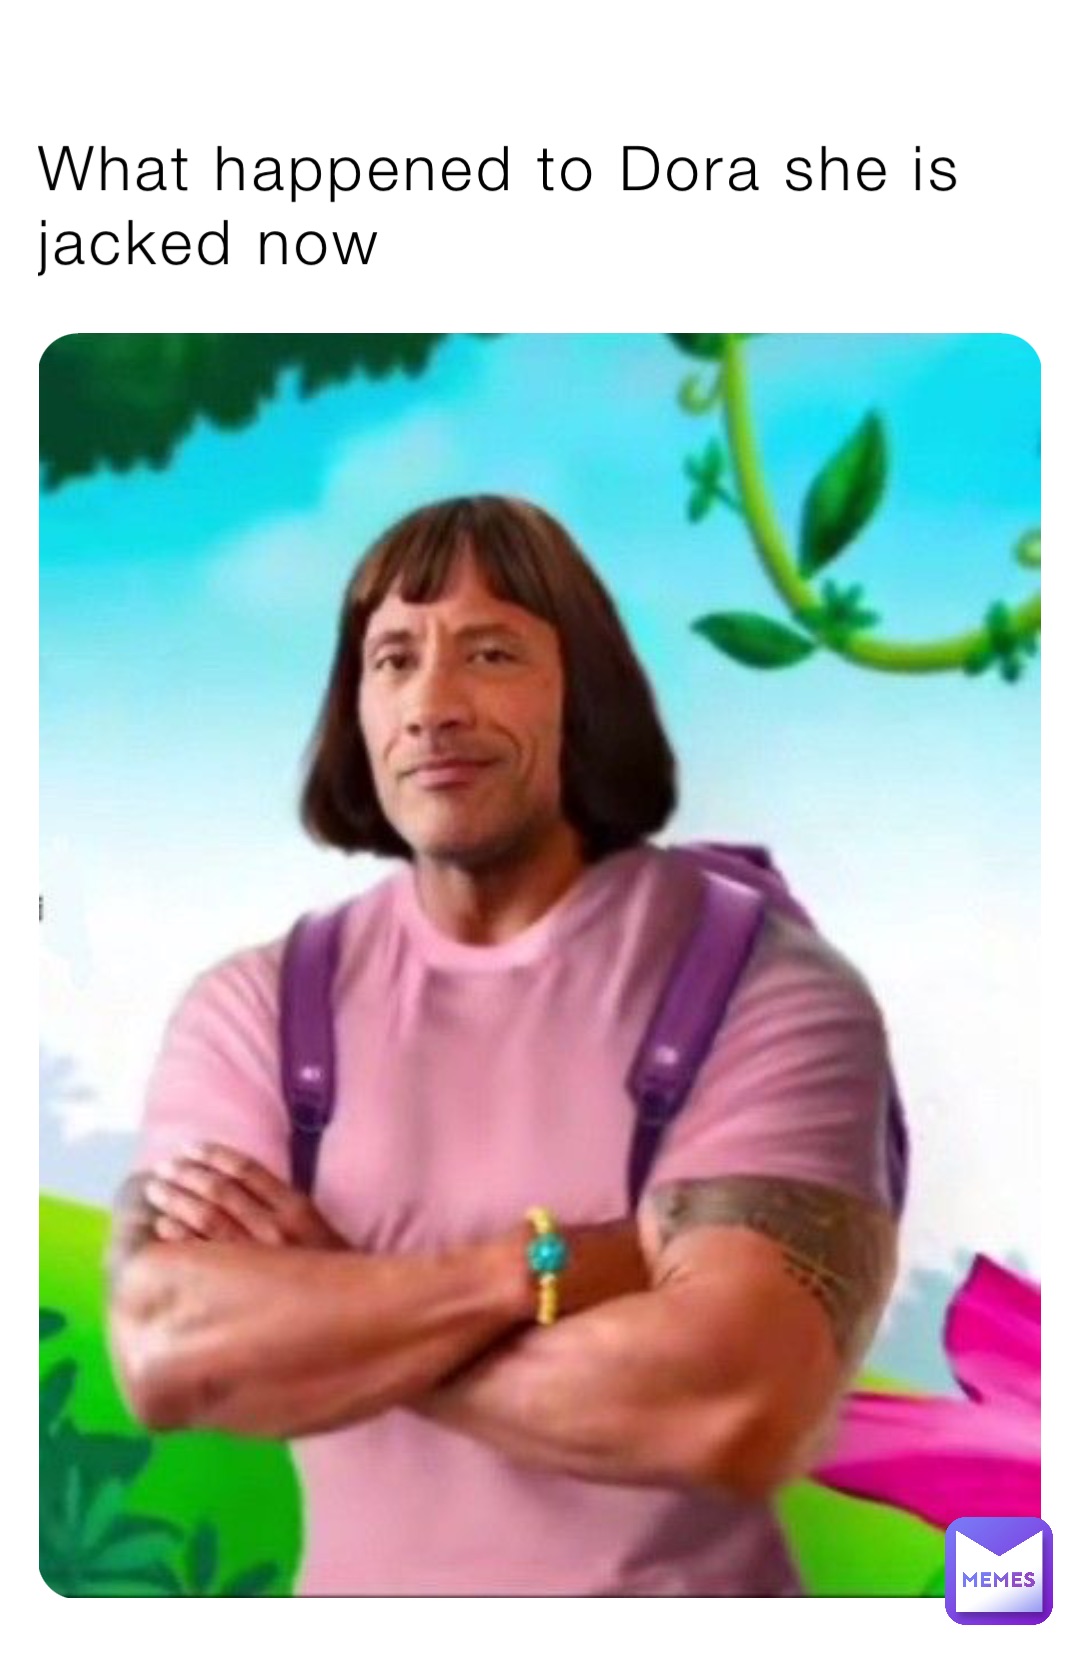 What happened to Dora she is jacked now